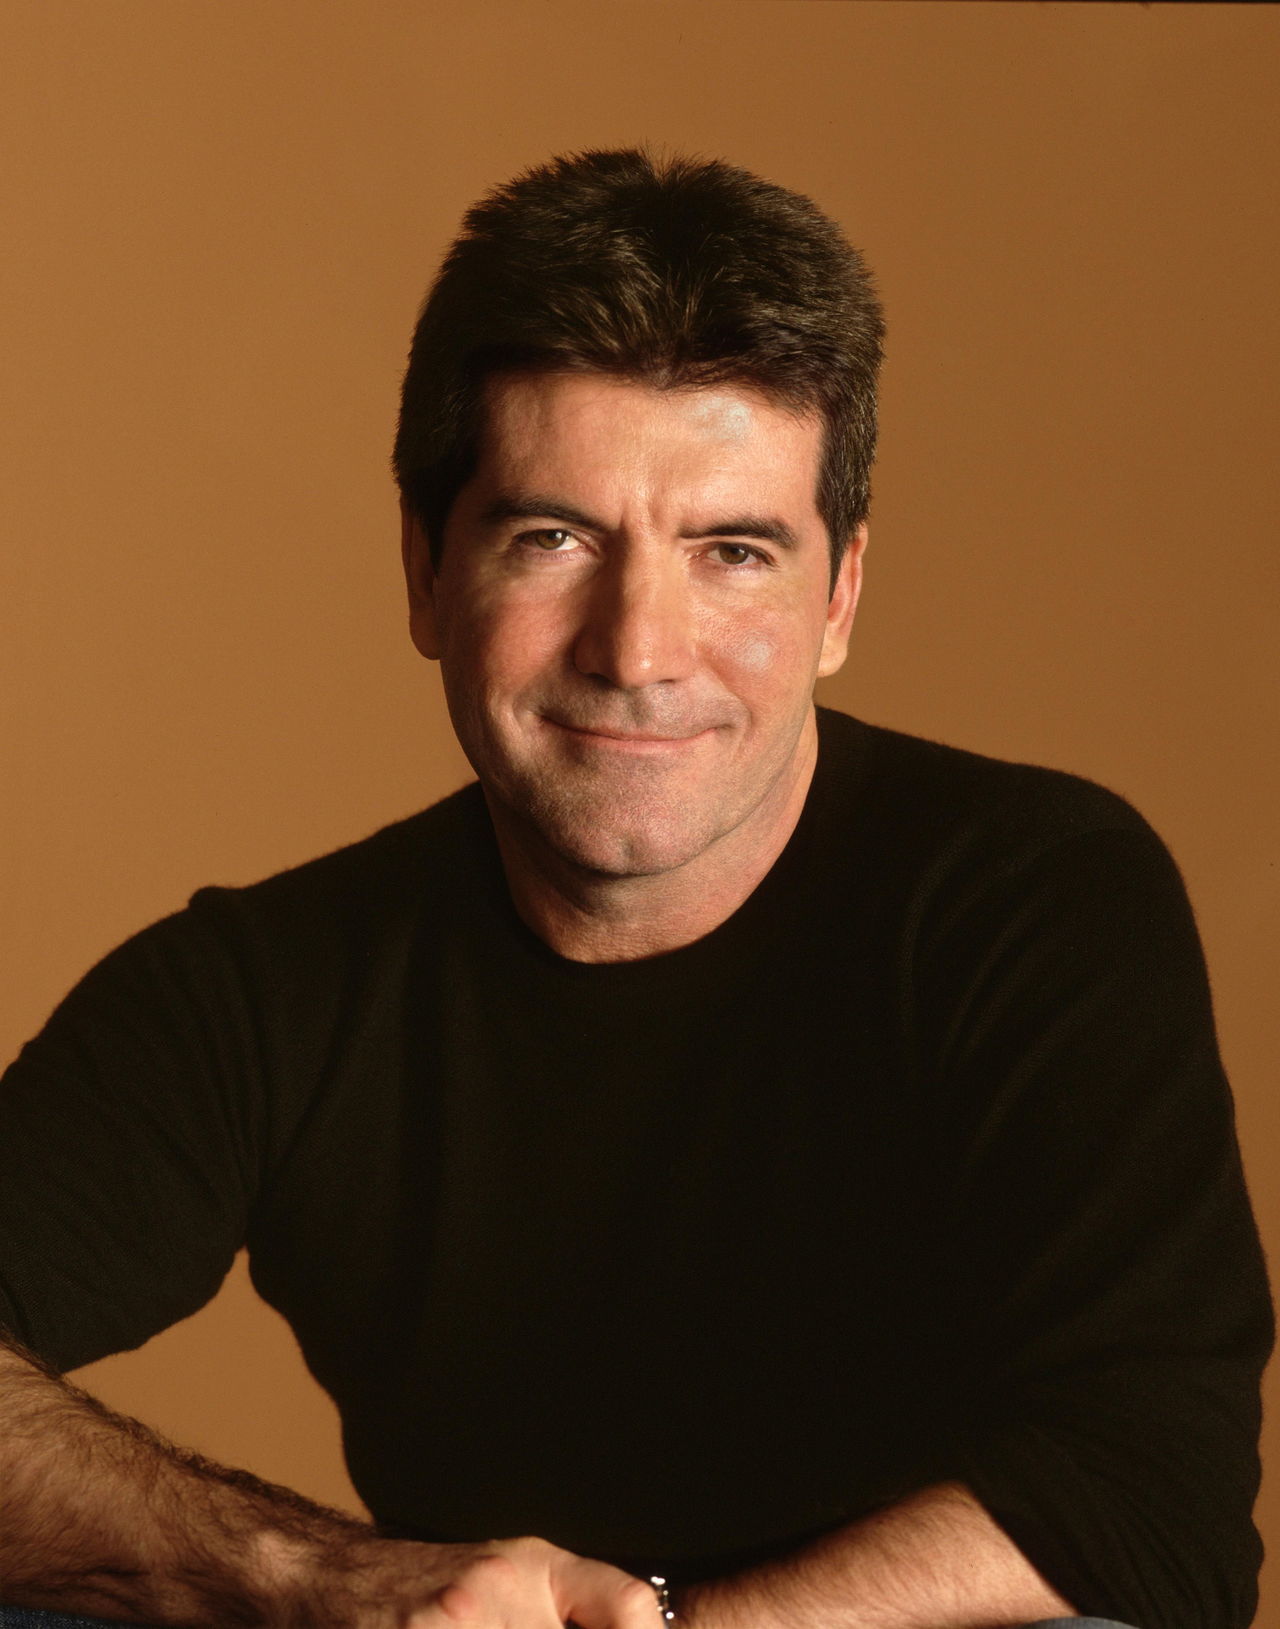 Simon Cowell will join the judges on the upcoming season of “America’s Got Talent.”